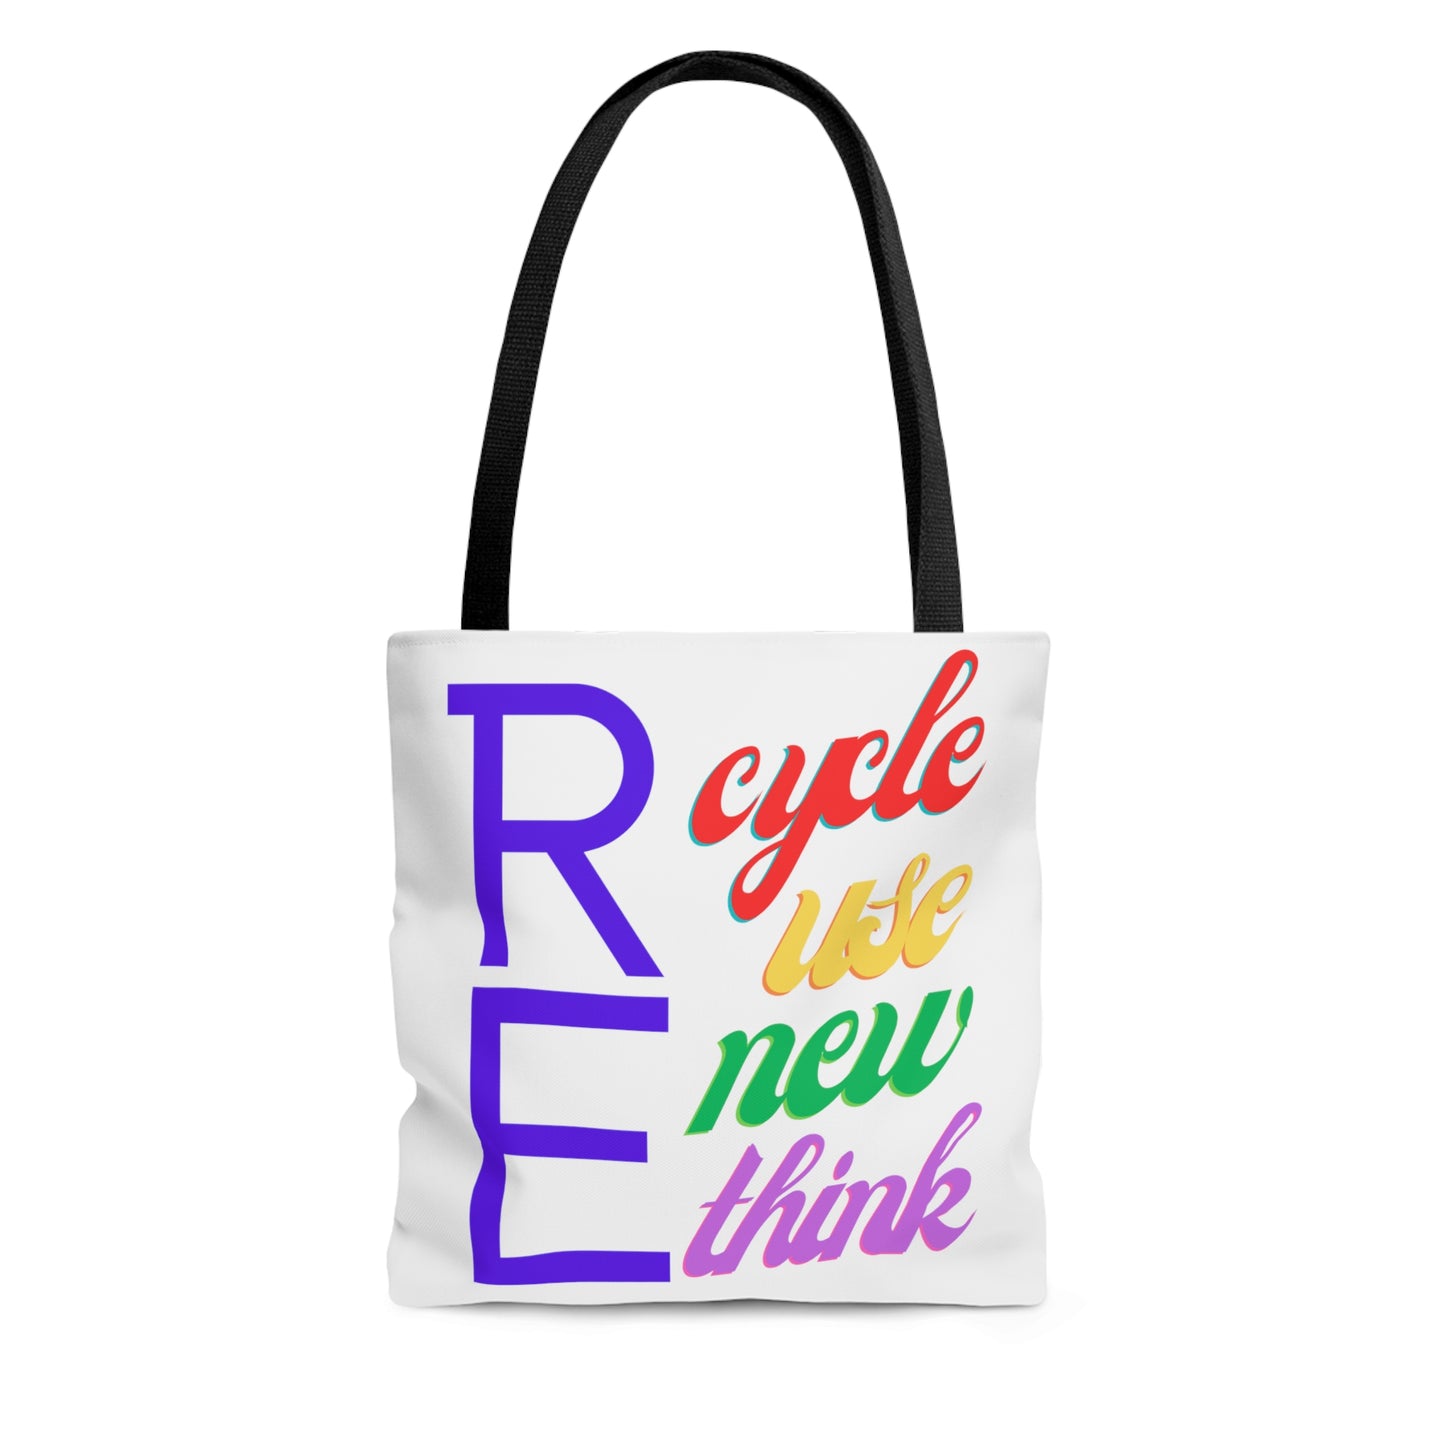 Recycle Reuse Renew Rethink Tote Bag, Carry Bag, Beach Bag. eco-Friendly and Sustainable Accessory, Green Living. Statement Gift Idea